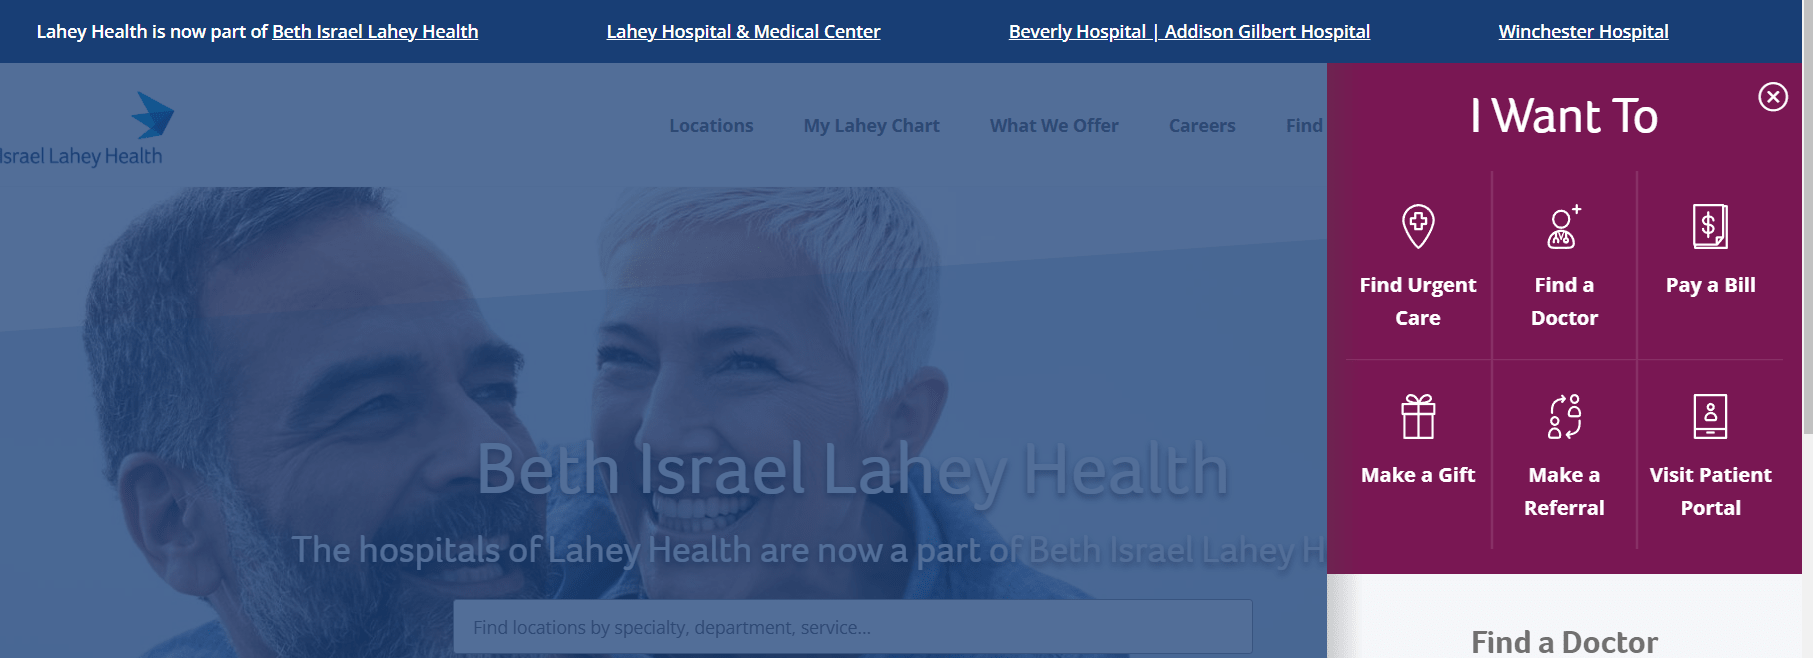 The Lahey Clinic, for example, uses a top level CTA